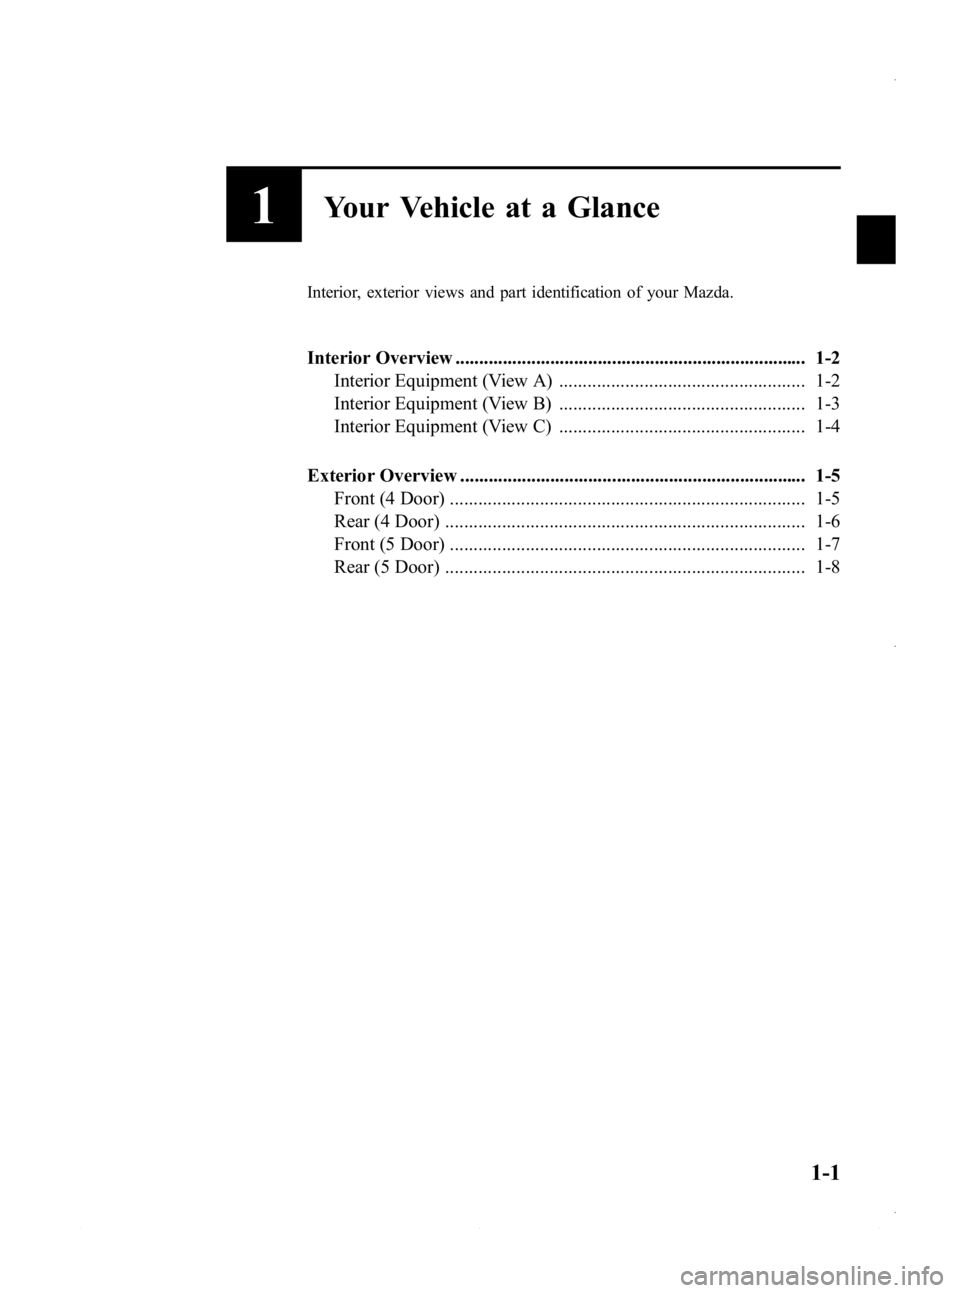 MAZDA MODEL 3 4-DOOR 2013  Owners Manual Black plate (7,1)
1Your Vehicle at a Glance
Interior, exterior views and part identification of your Mazda.
Interior Overview ..........................................................................